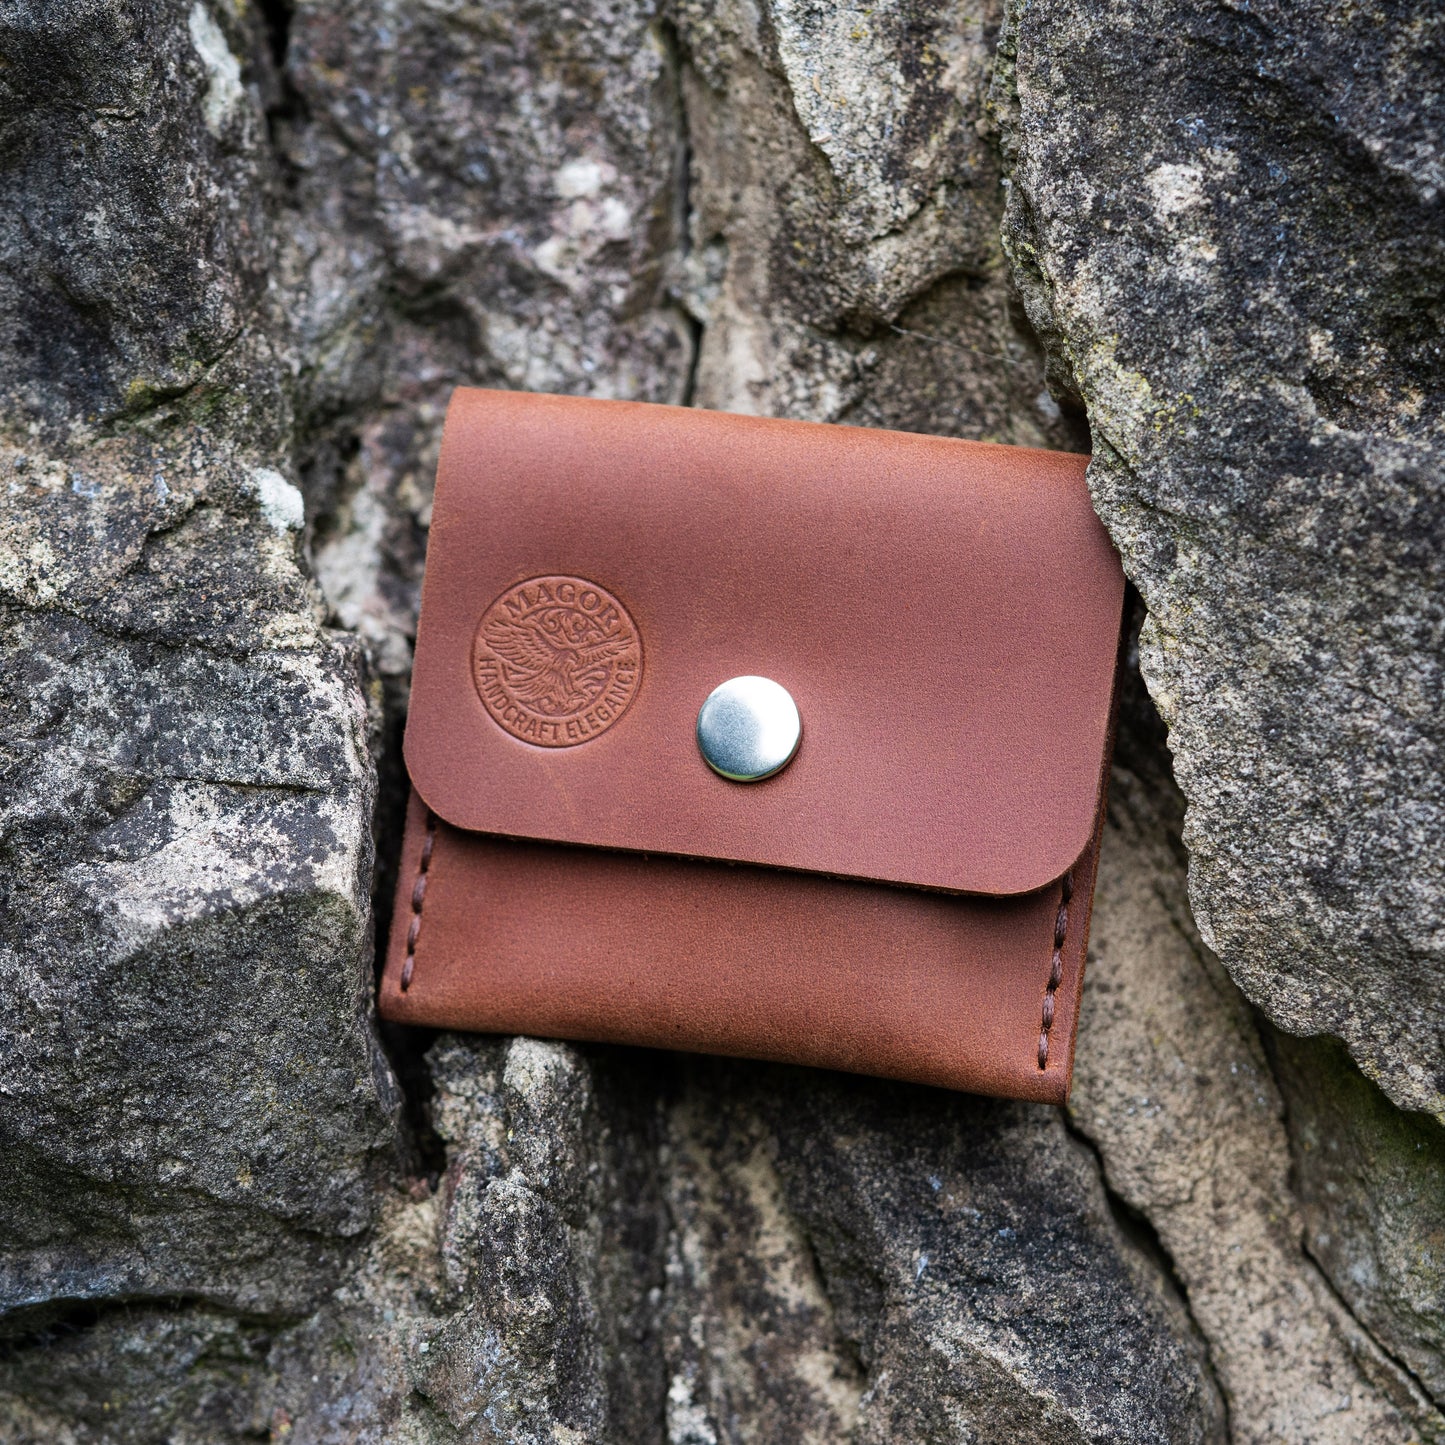 Leather Coin Purse- Hand Stitched |Coin Bag, Minimalist Wallet, Earphone Holder, Jewelery Pouch